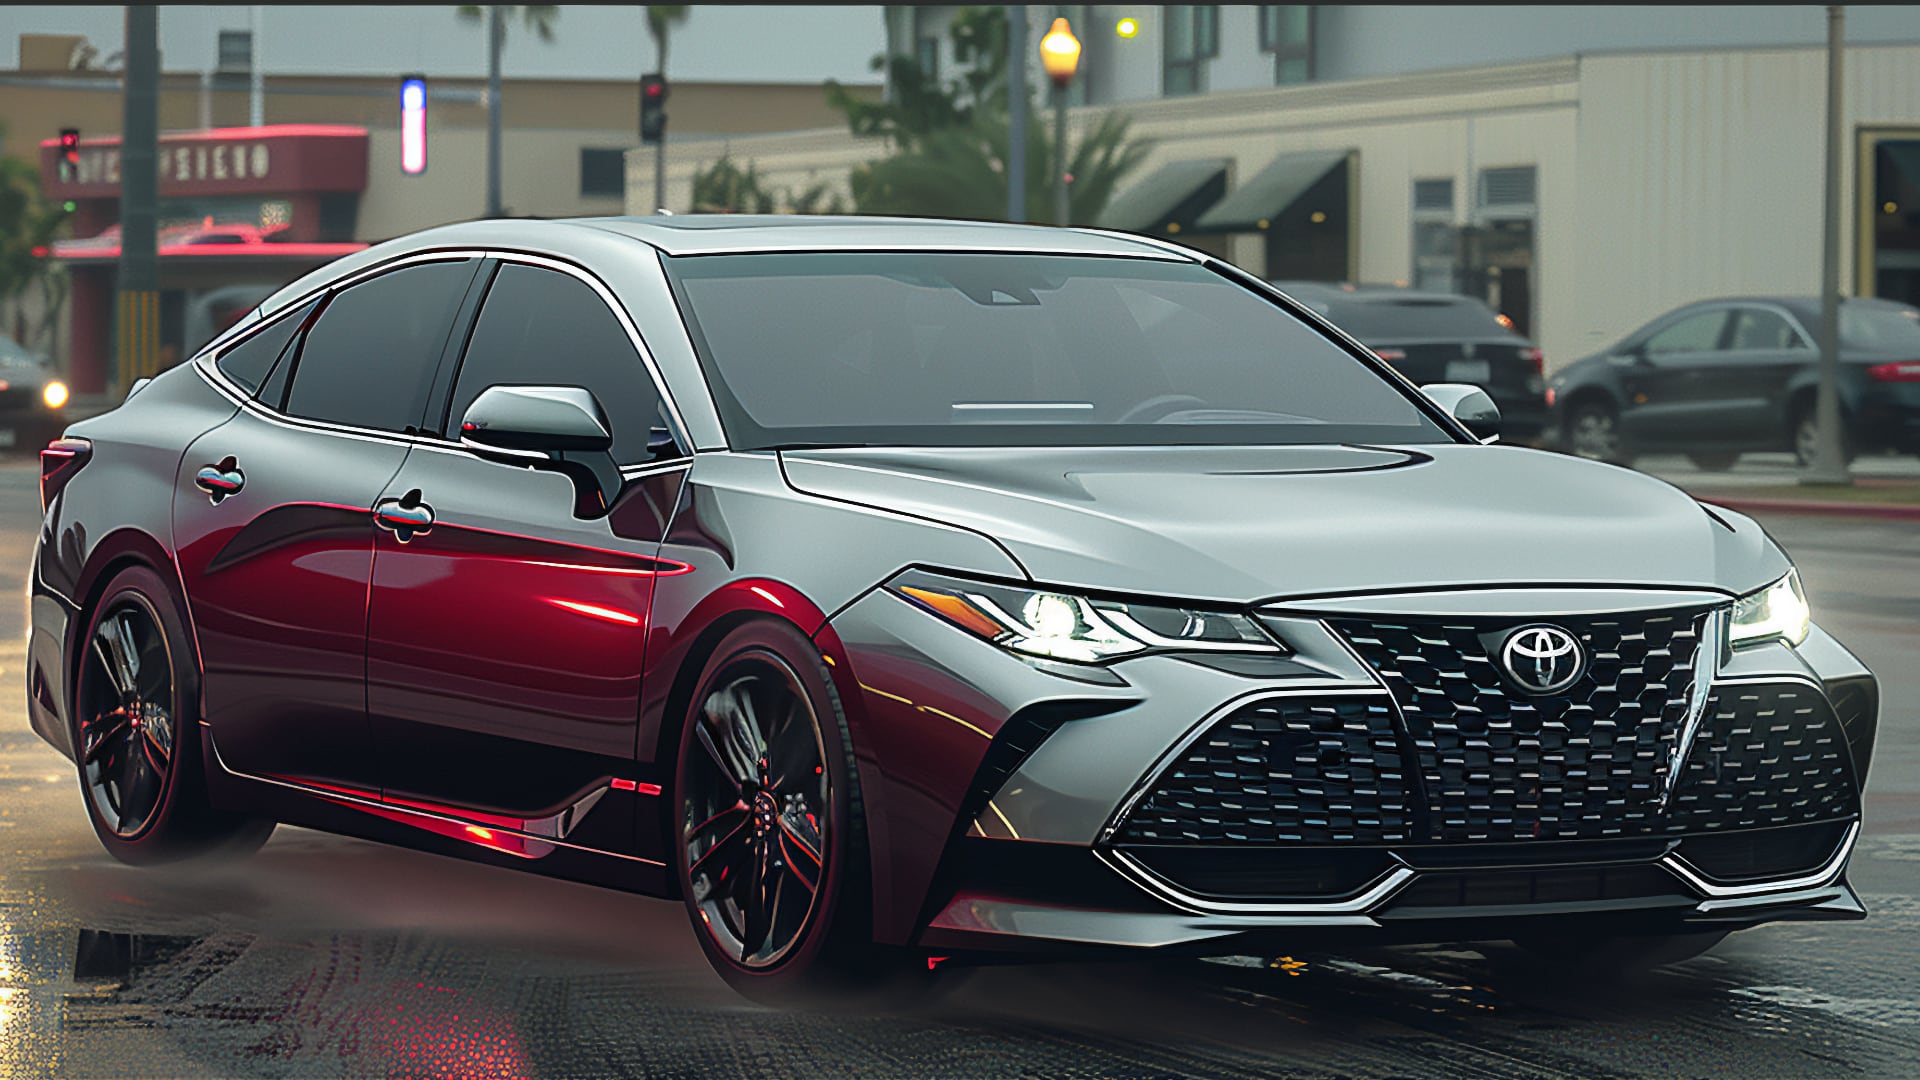 The Toyota Avalon from 2019 is cruising down the street.